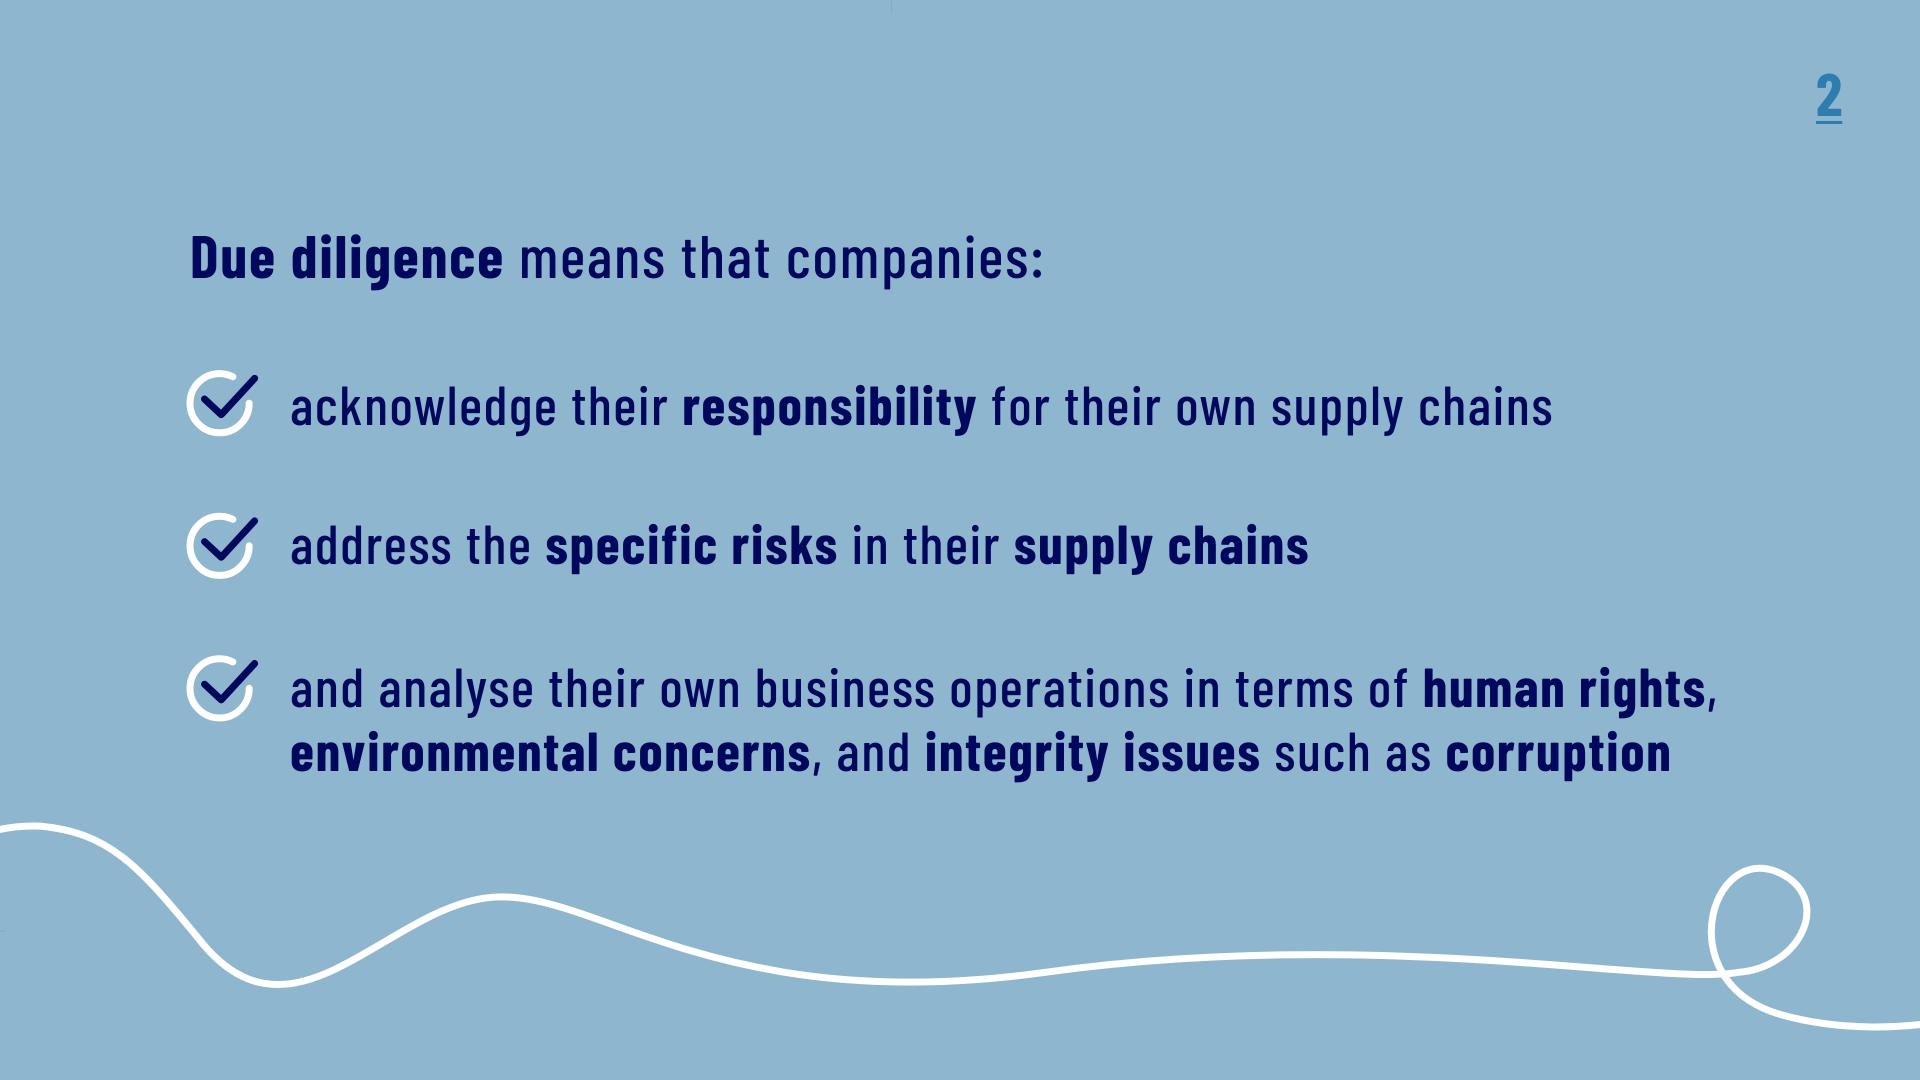 Due Diligence means that companies: acknowledge their responsibility for their own supply chains, address the specific risks in their supply chains, and analyse their own business operations in terms of human rights, environmental concerns, and integrity issues such as corruption